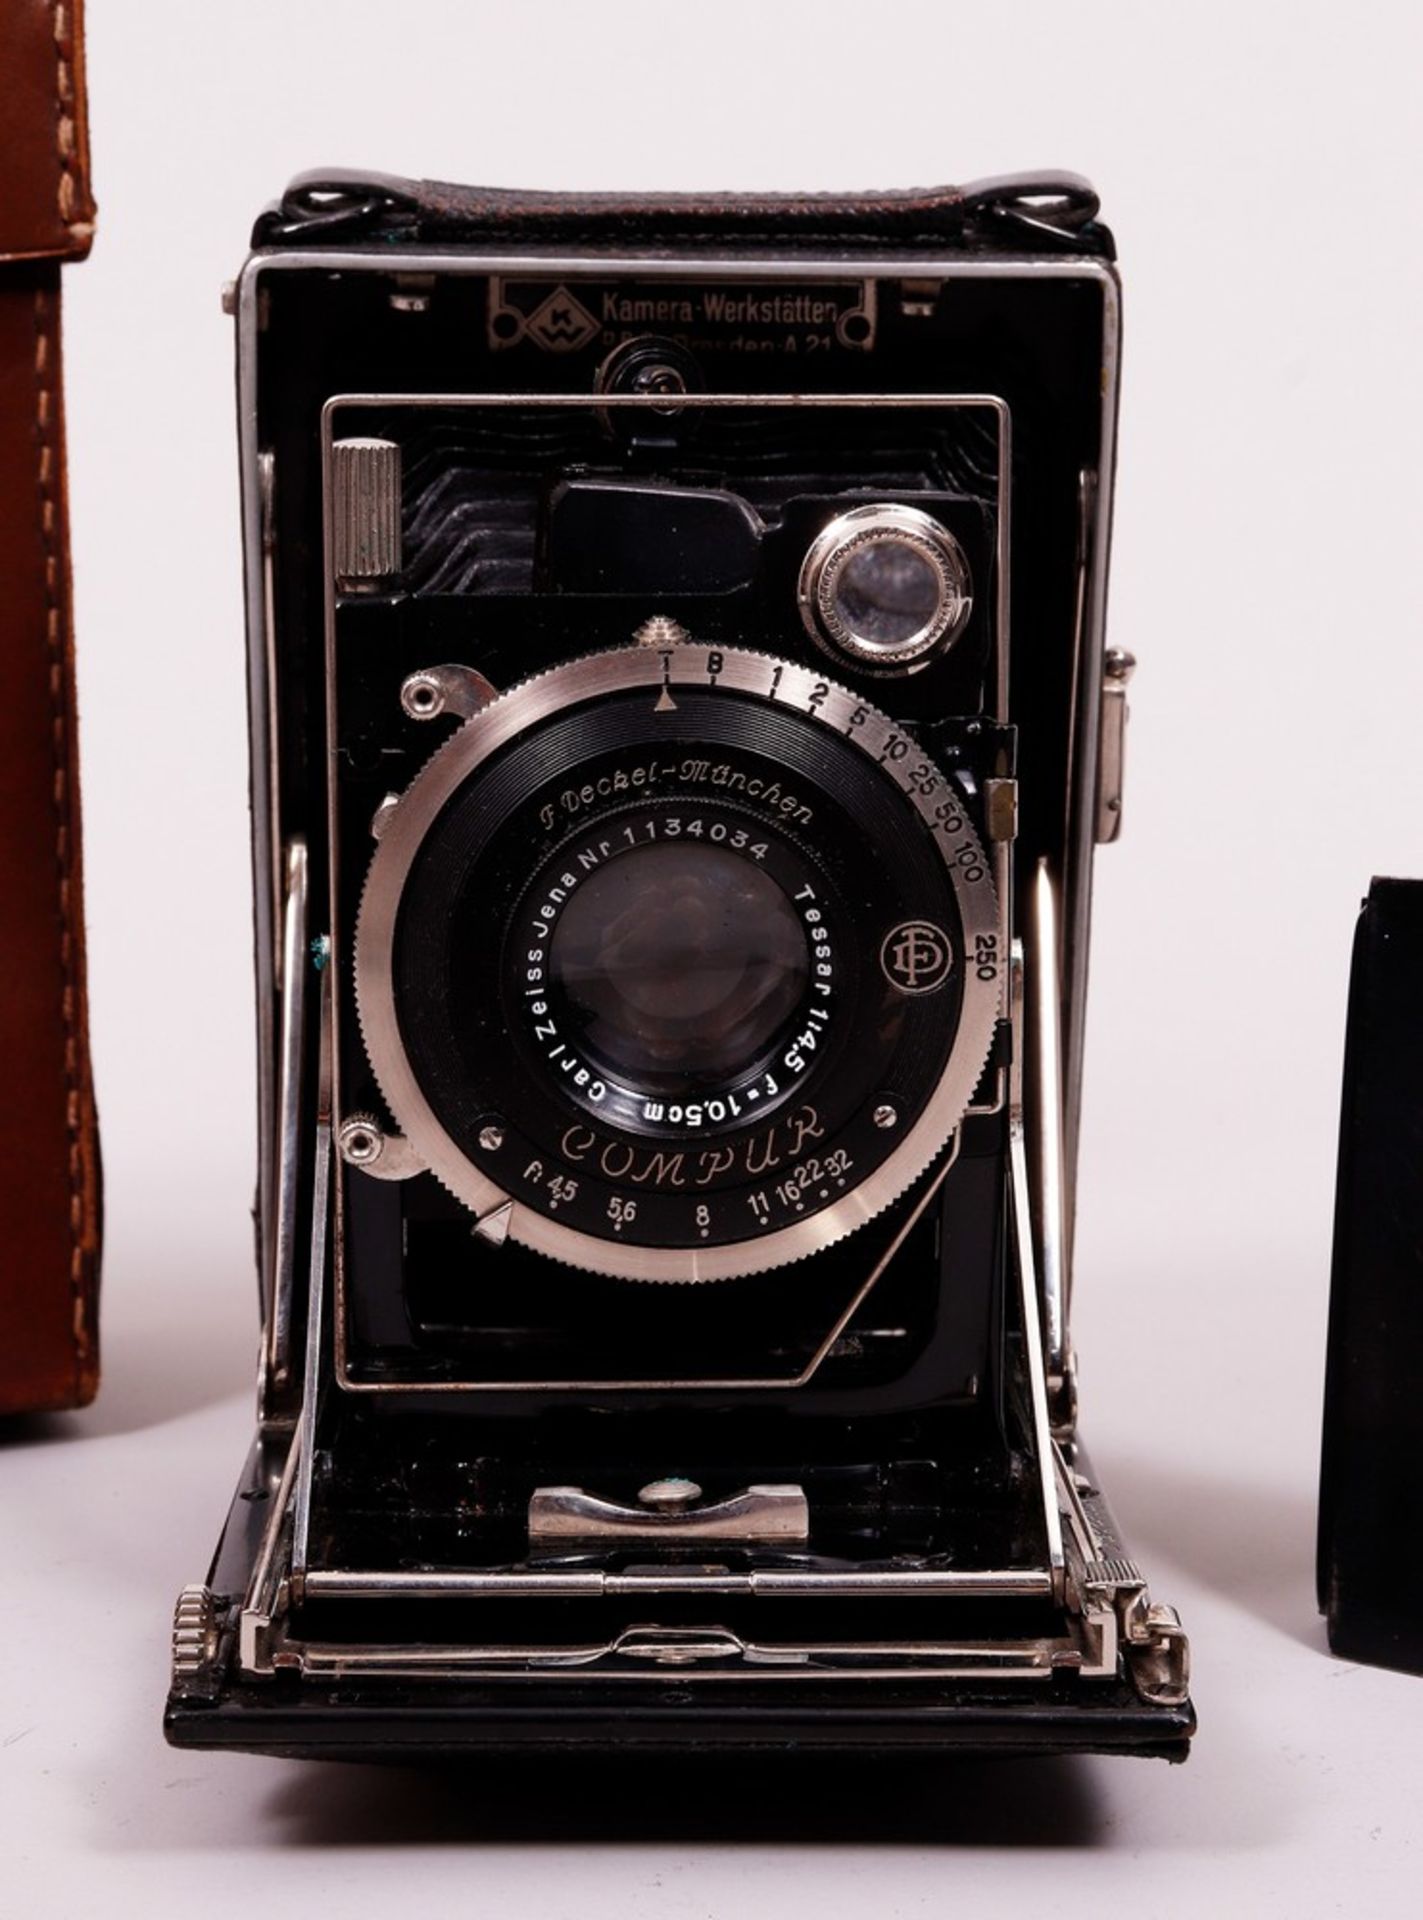 Small plate camera in case, K.W. Camera workshop Guthe & Thorsch, Dresden, c. 1930 - Image 5 of 7